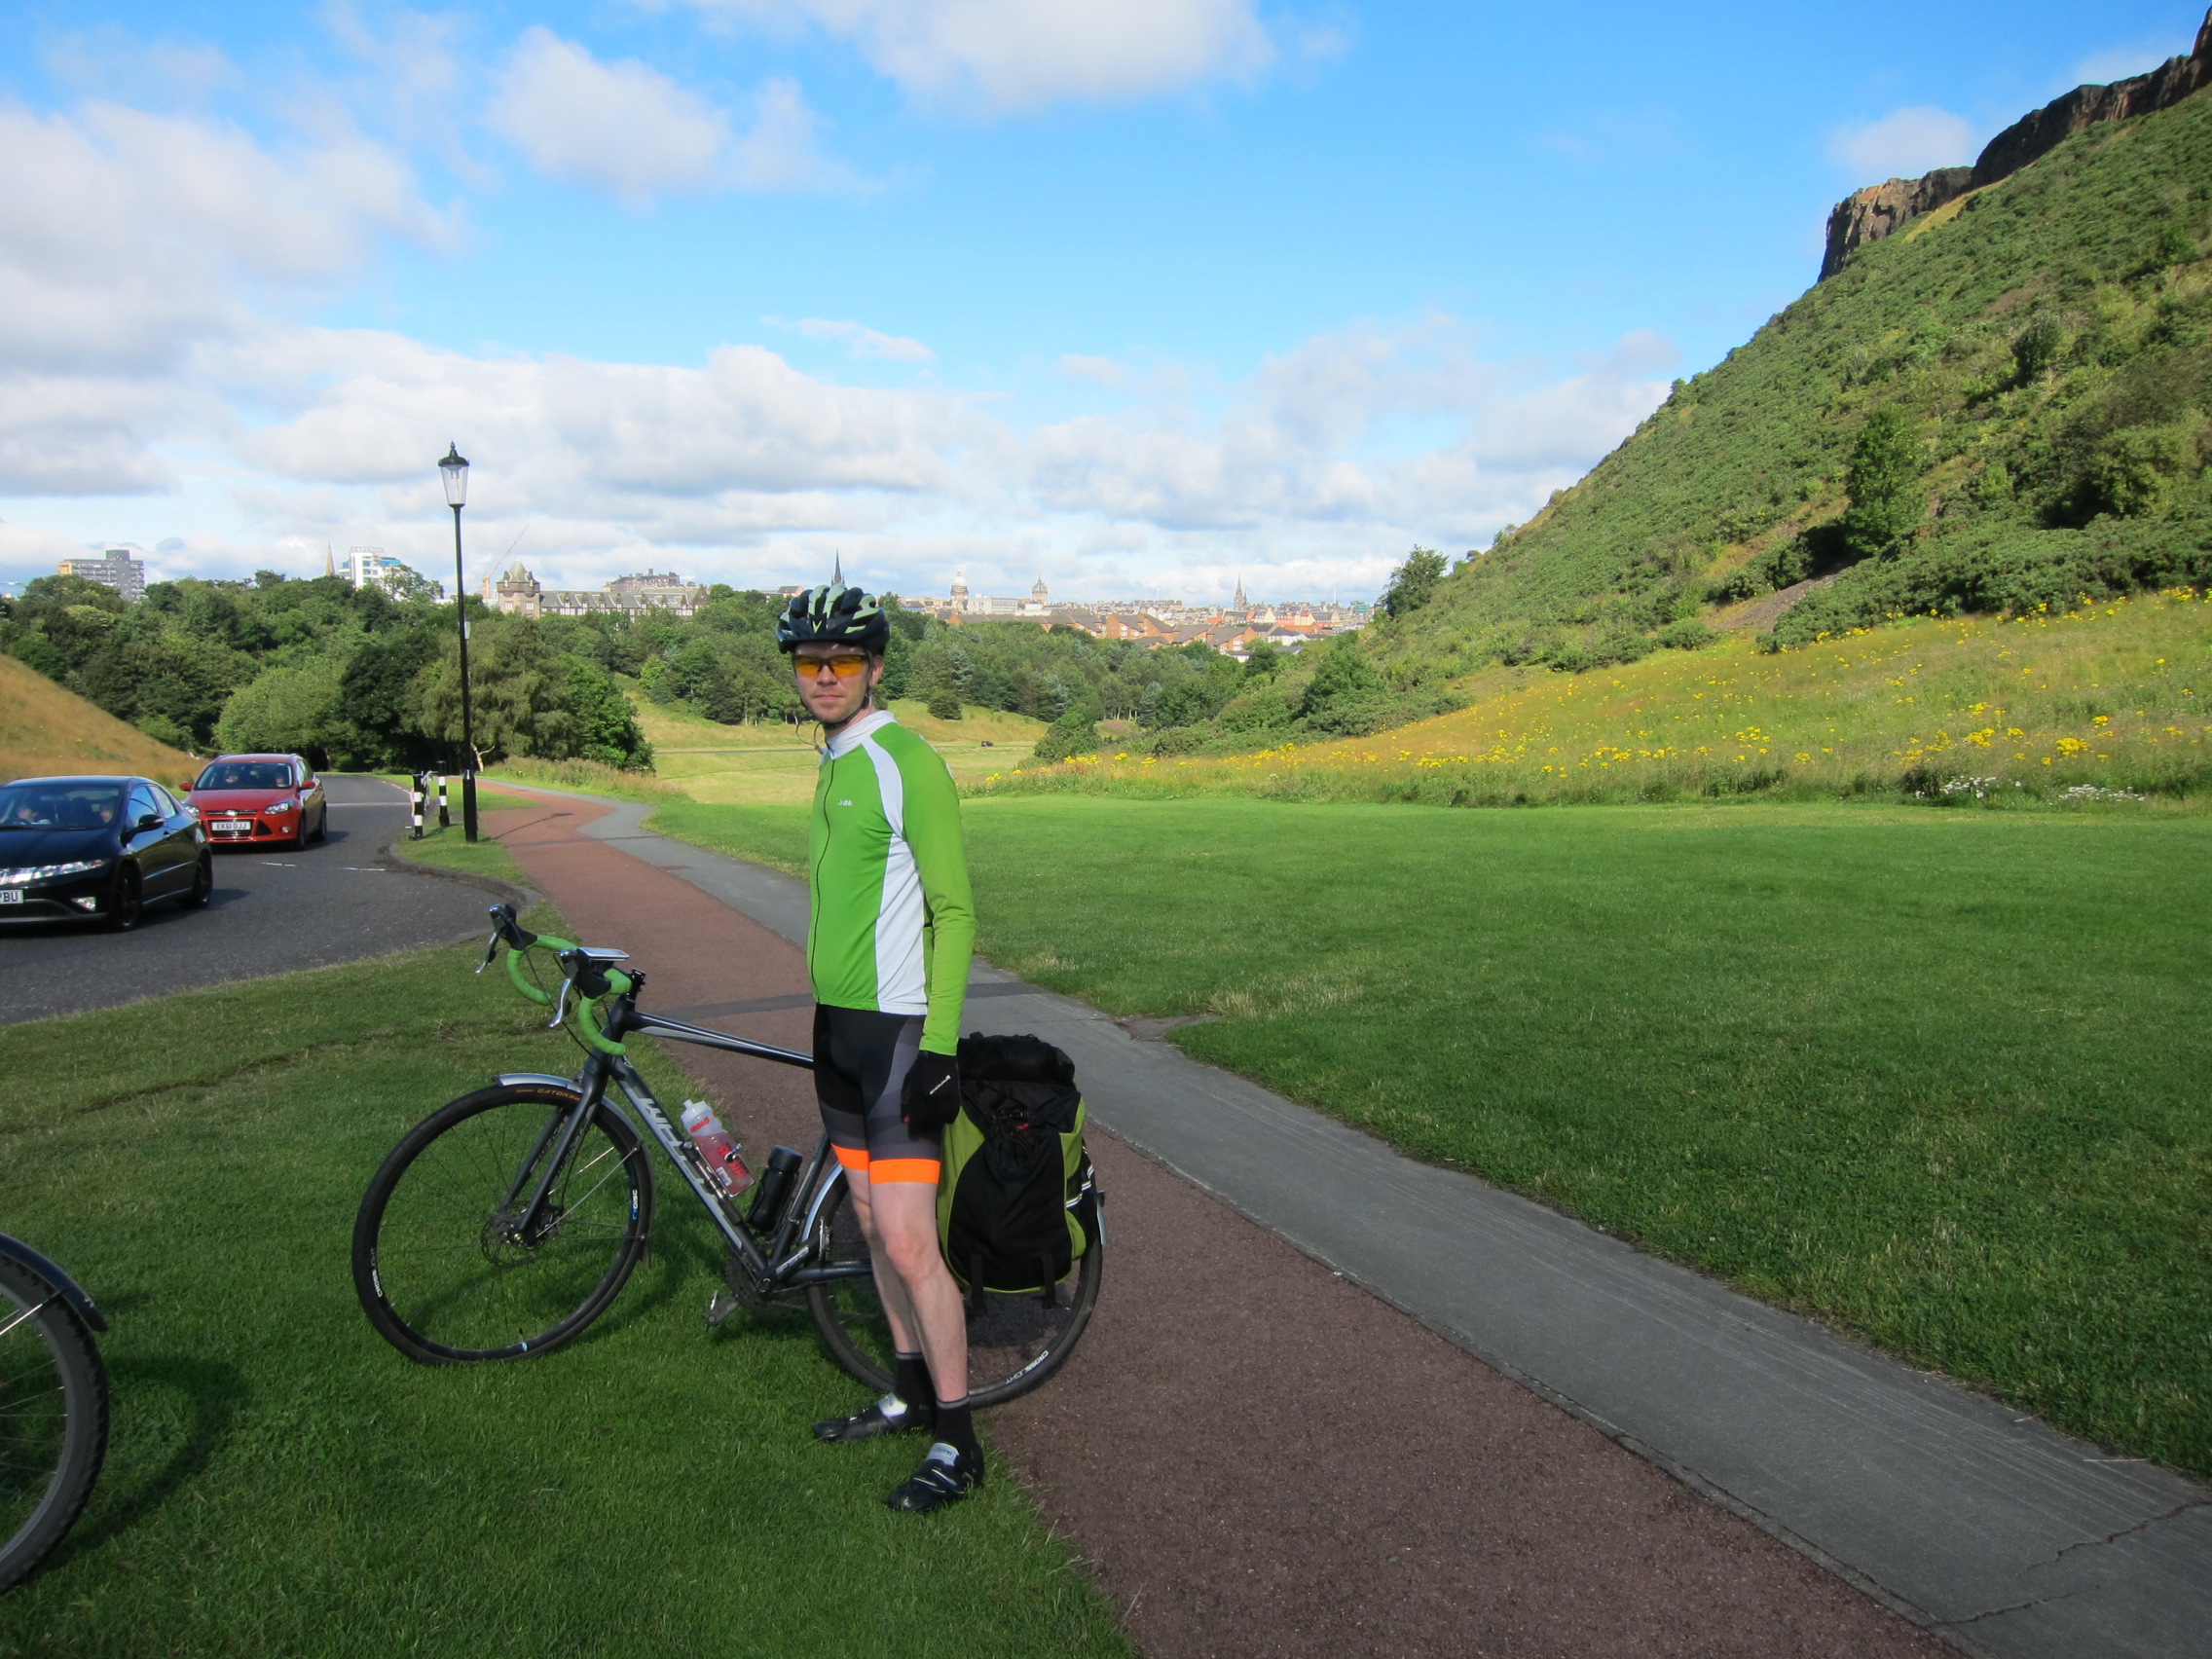 Gareth in cycle gear standing next to his bike in Holyrood Park